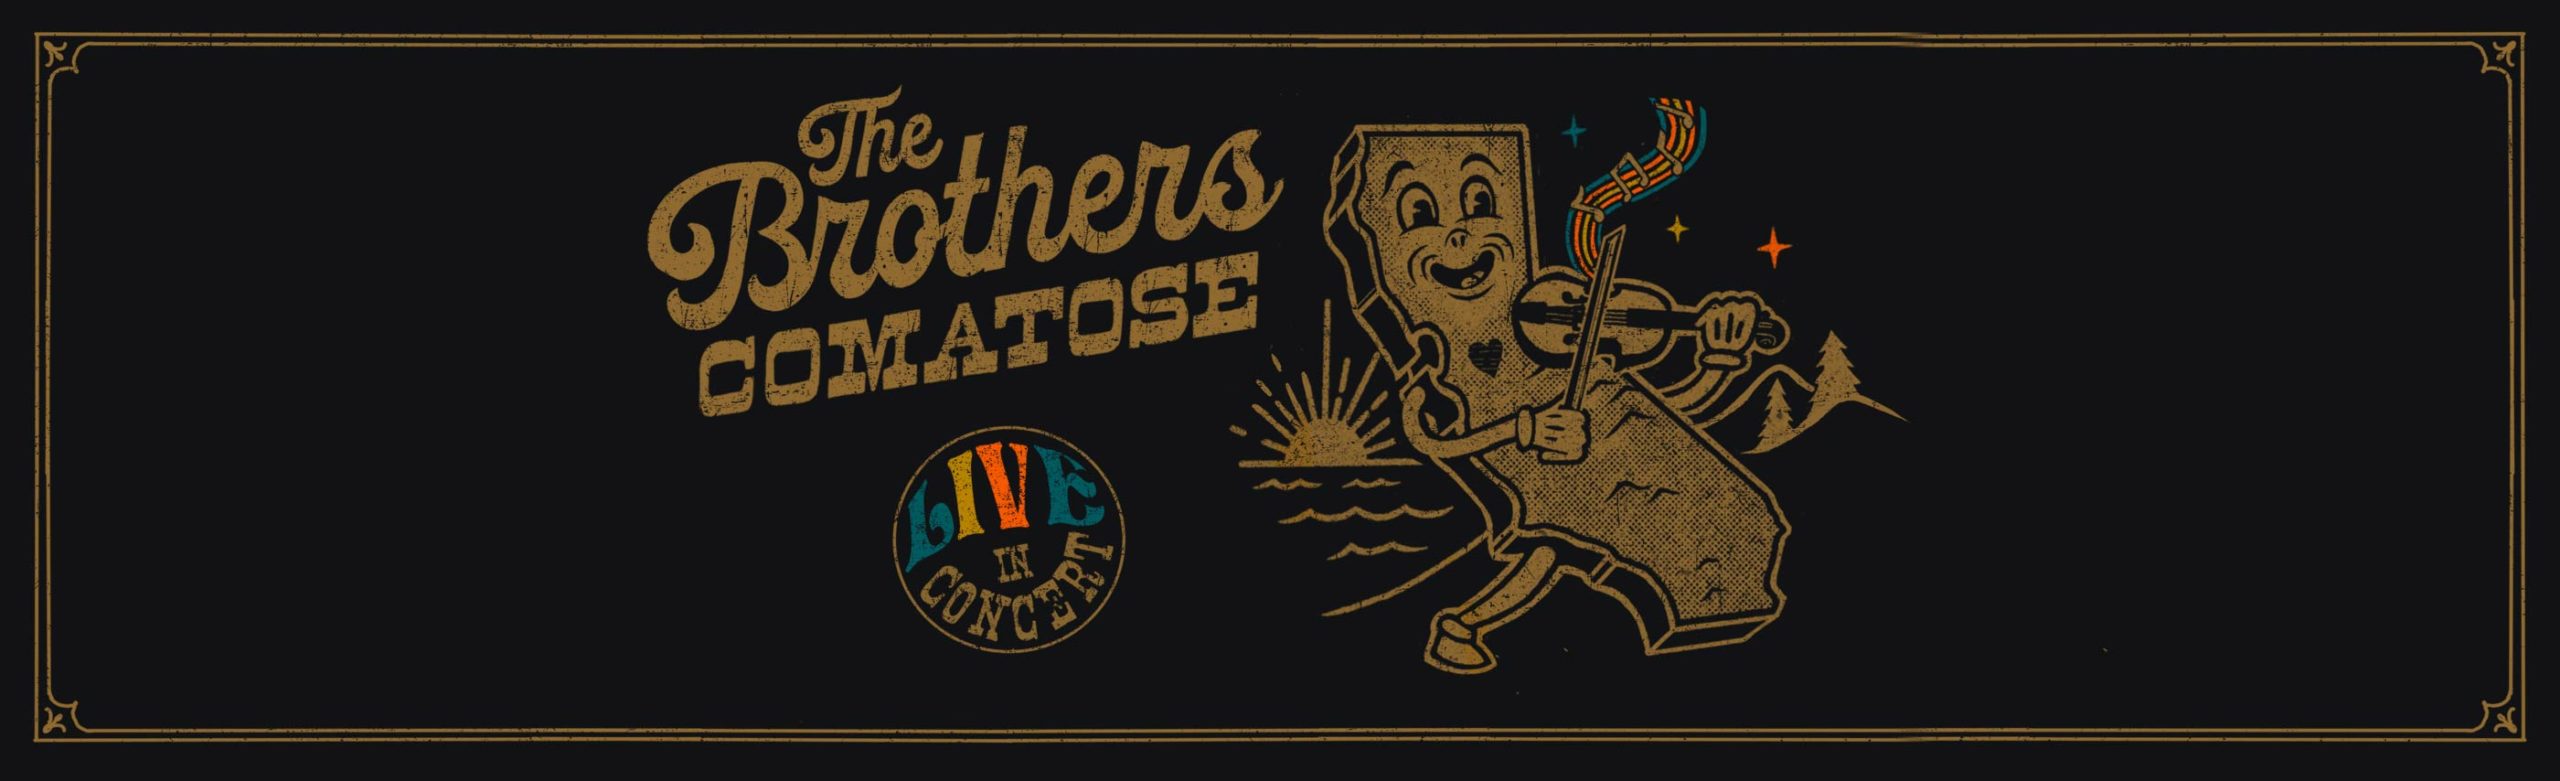 The Brothers Comatose Announce Two Montana Concerts with TK & The Holy Know-Nothings Image